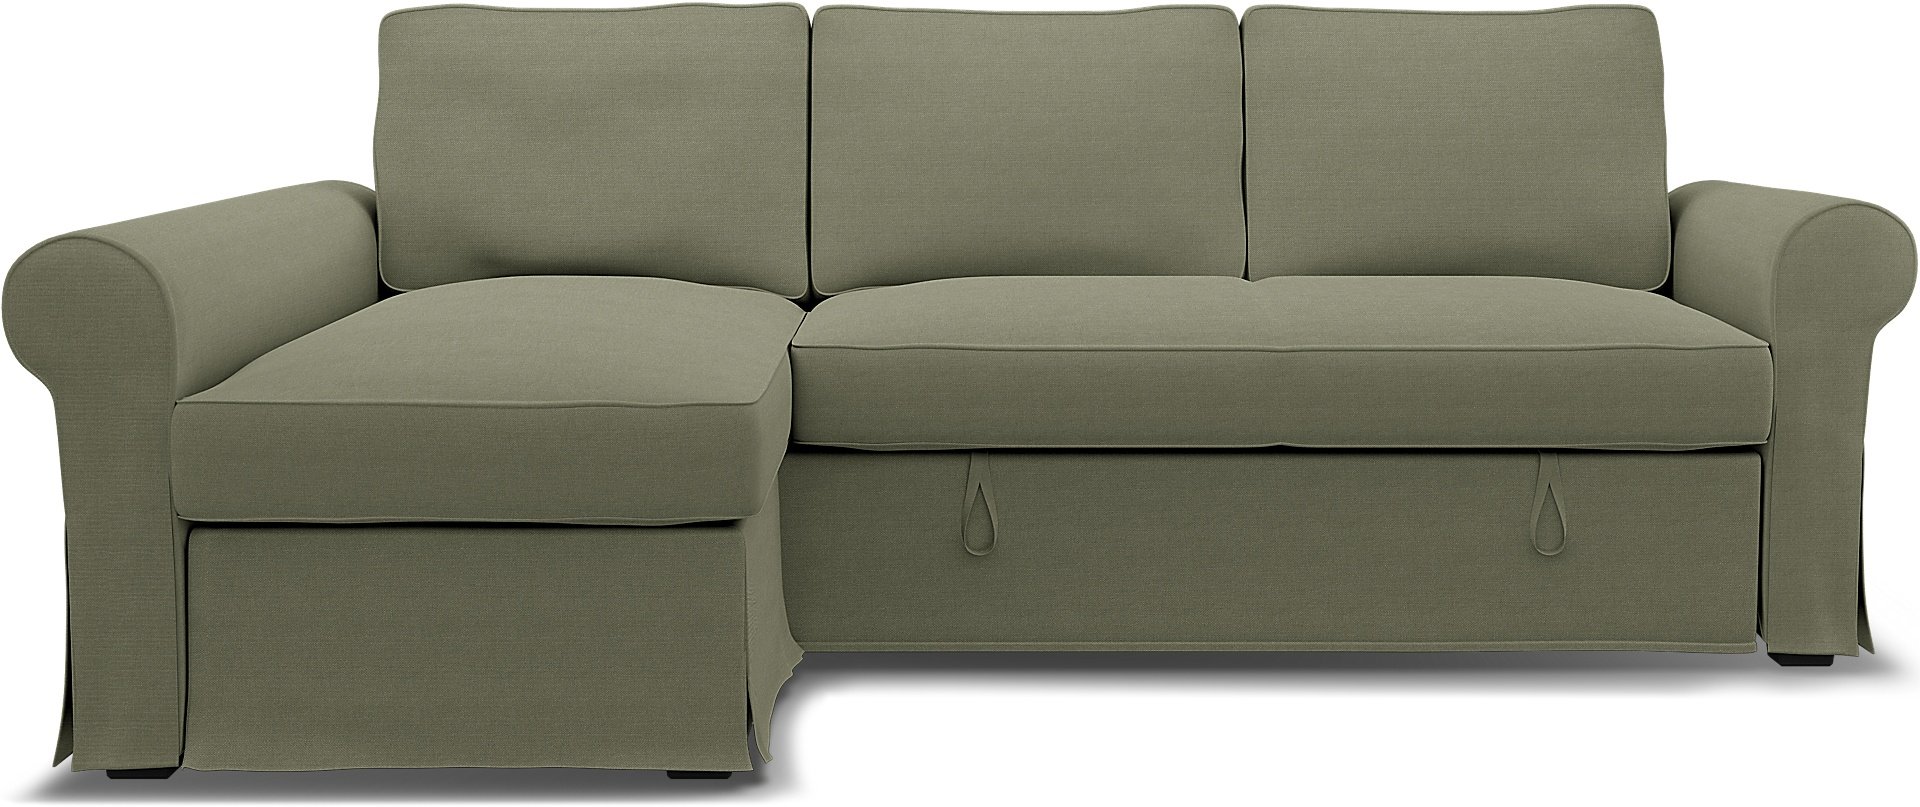 IKEA - Backabro Sofabed with Chaise Cover, Sage, Linen - Bemz